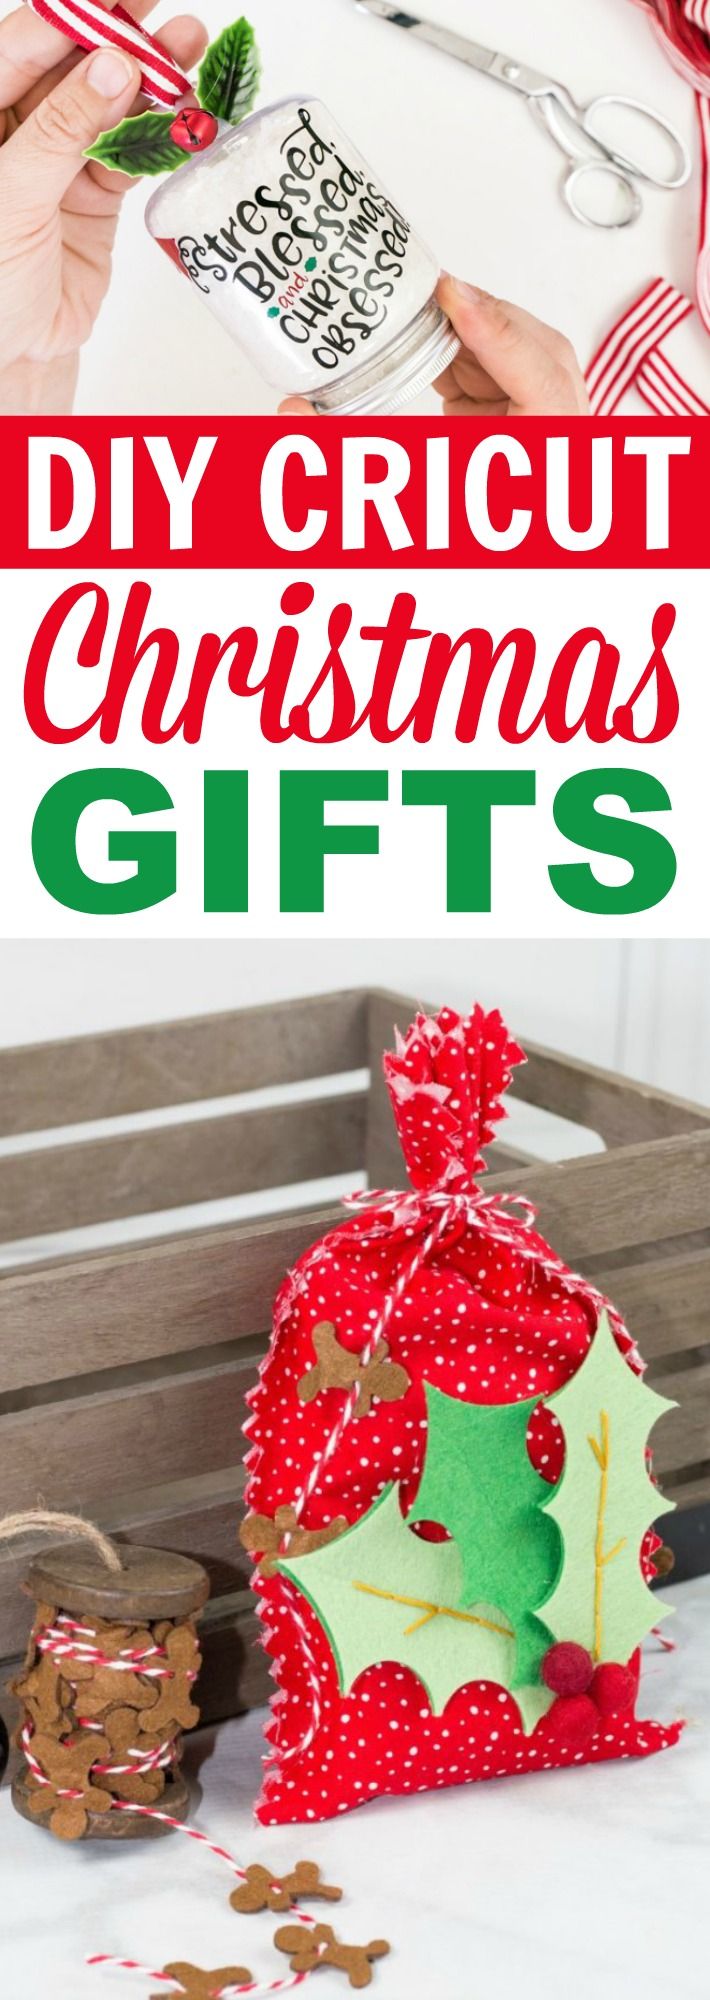 I love Christmas crafts and these DIY Cricut Christmas Gifts are perfect to make...